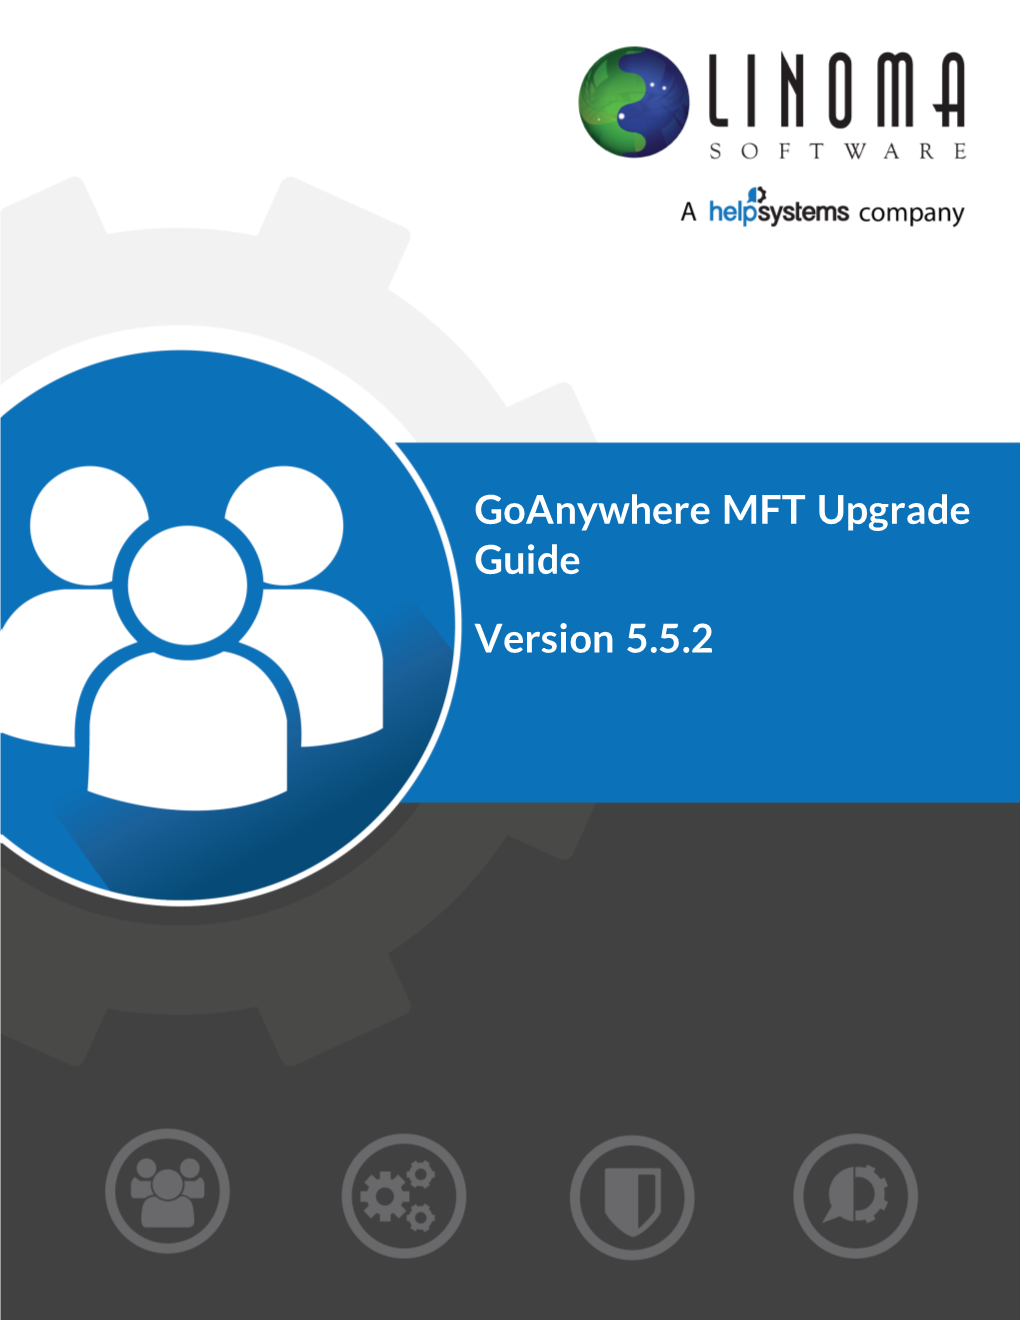 Goanywhere MFT Upgrade Guide Version 5.5.2 Copyright Terms and Conditions